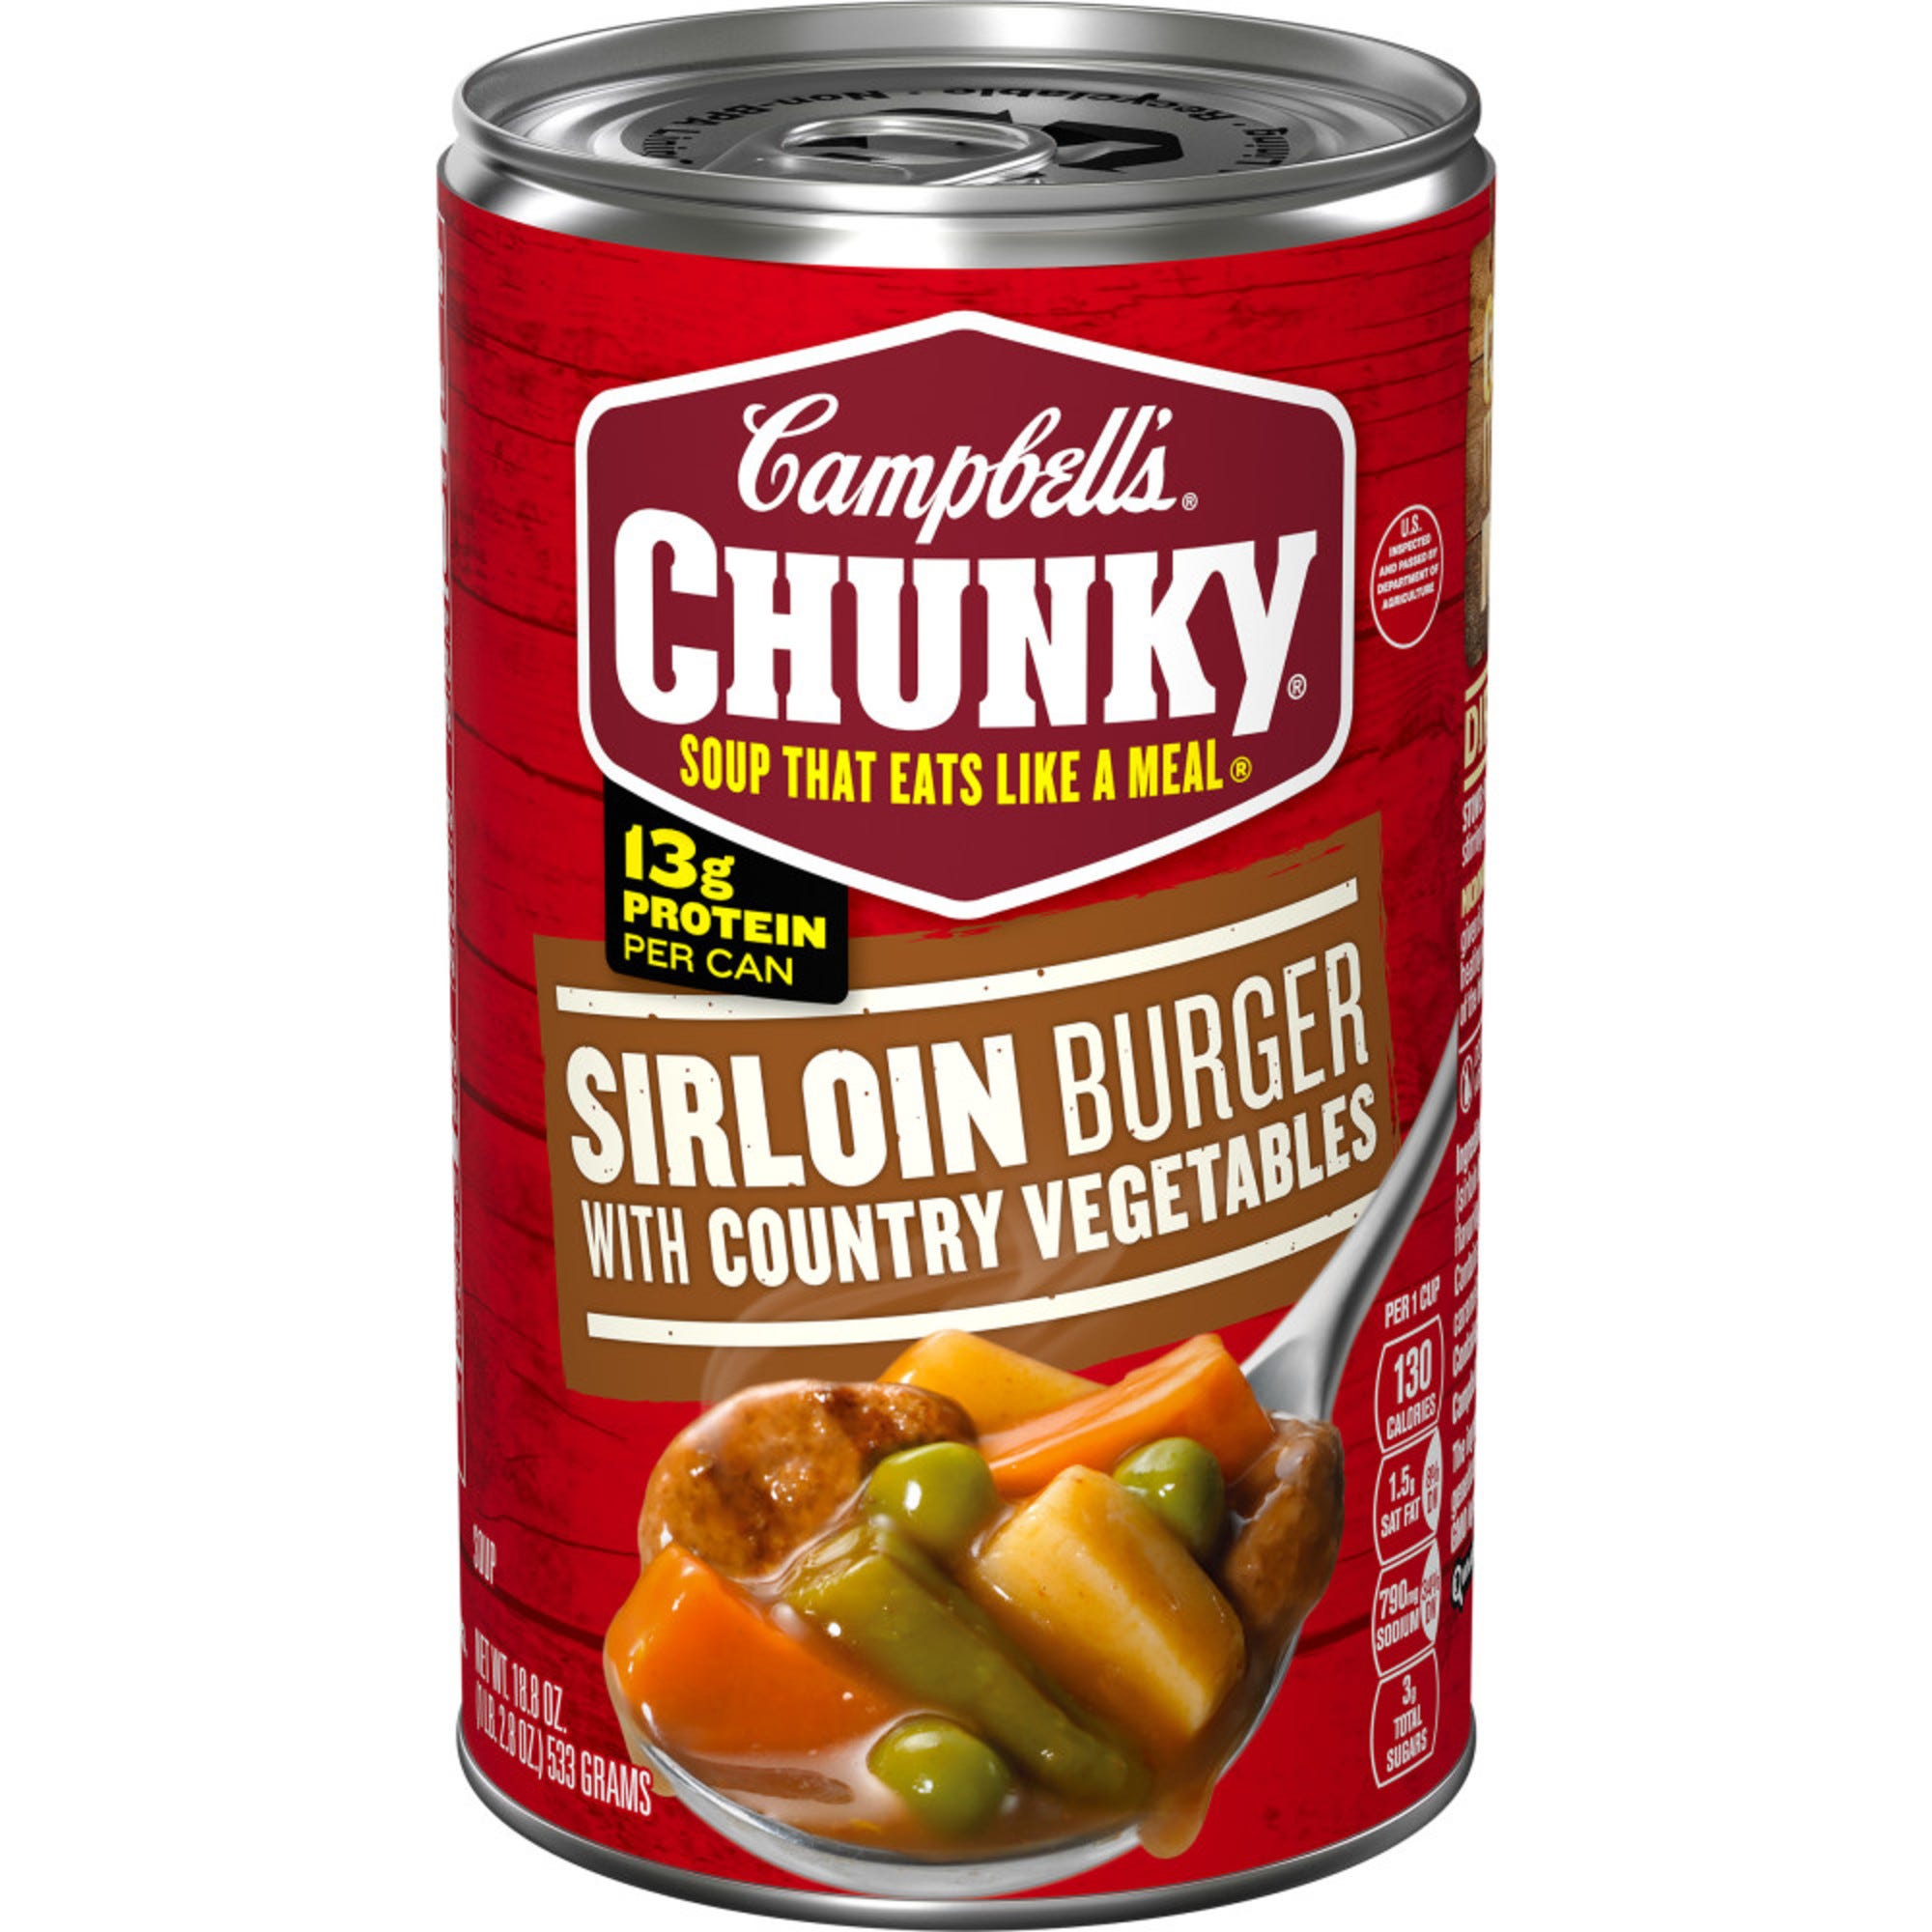 Campbells Chunky Soup, Sirloin Burger with Country Vegetables - 18.8 oz